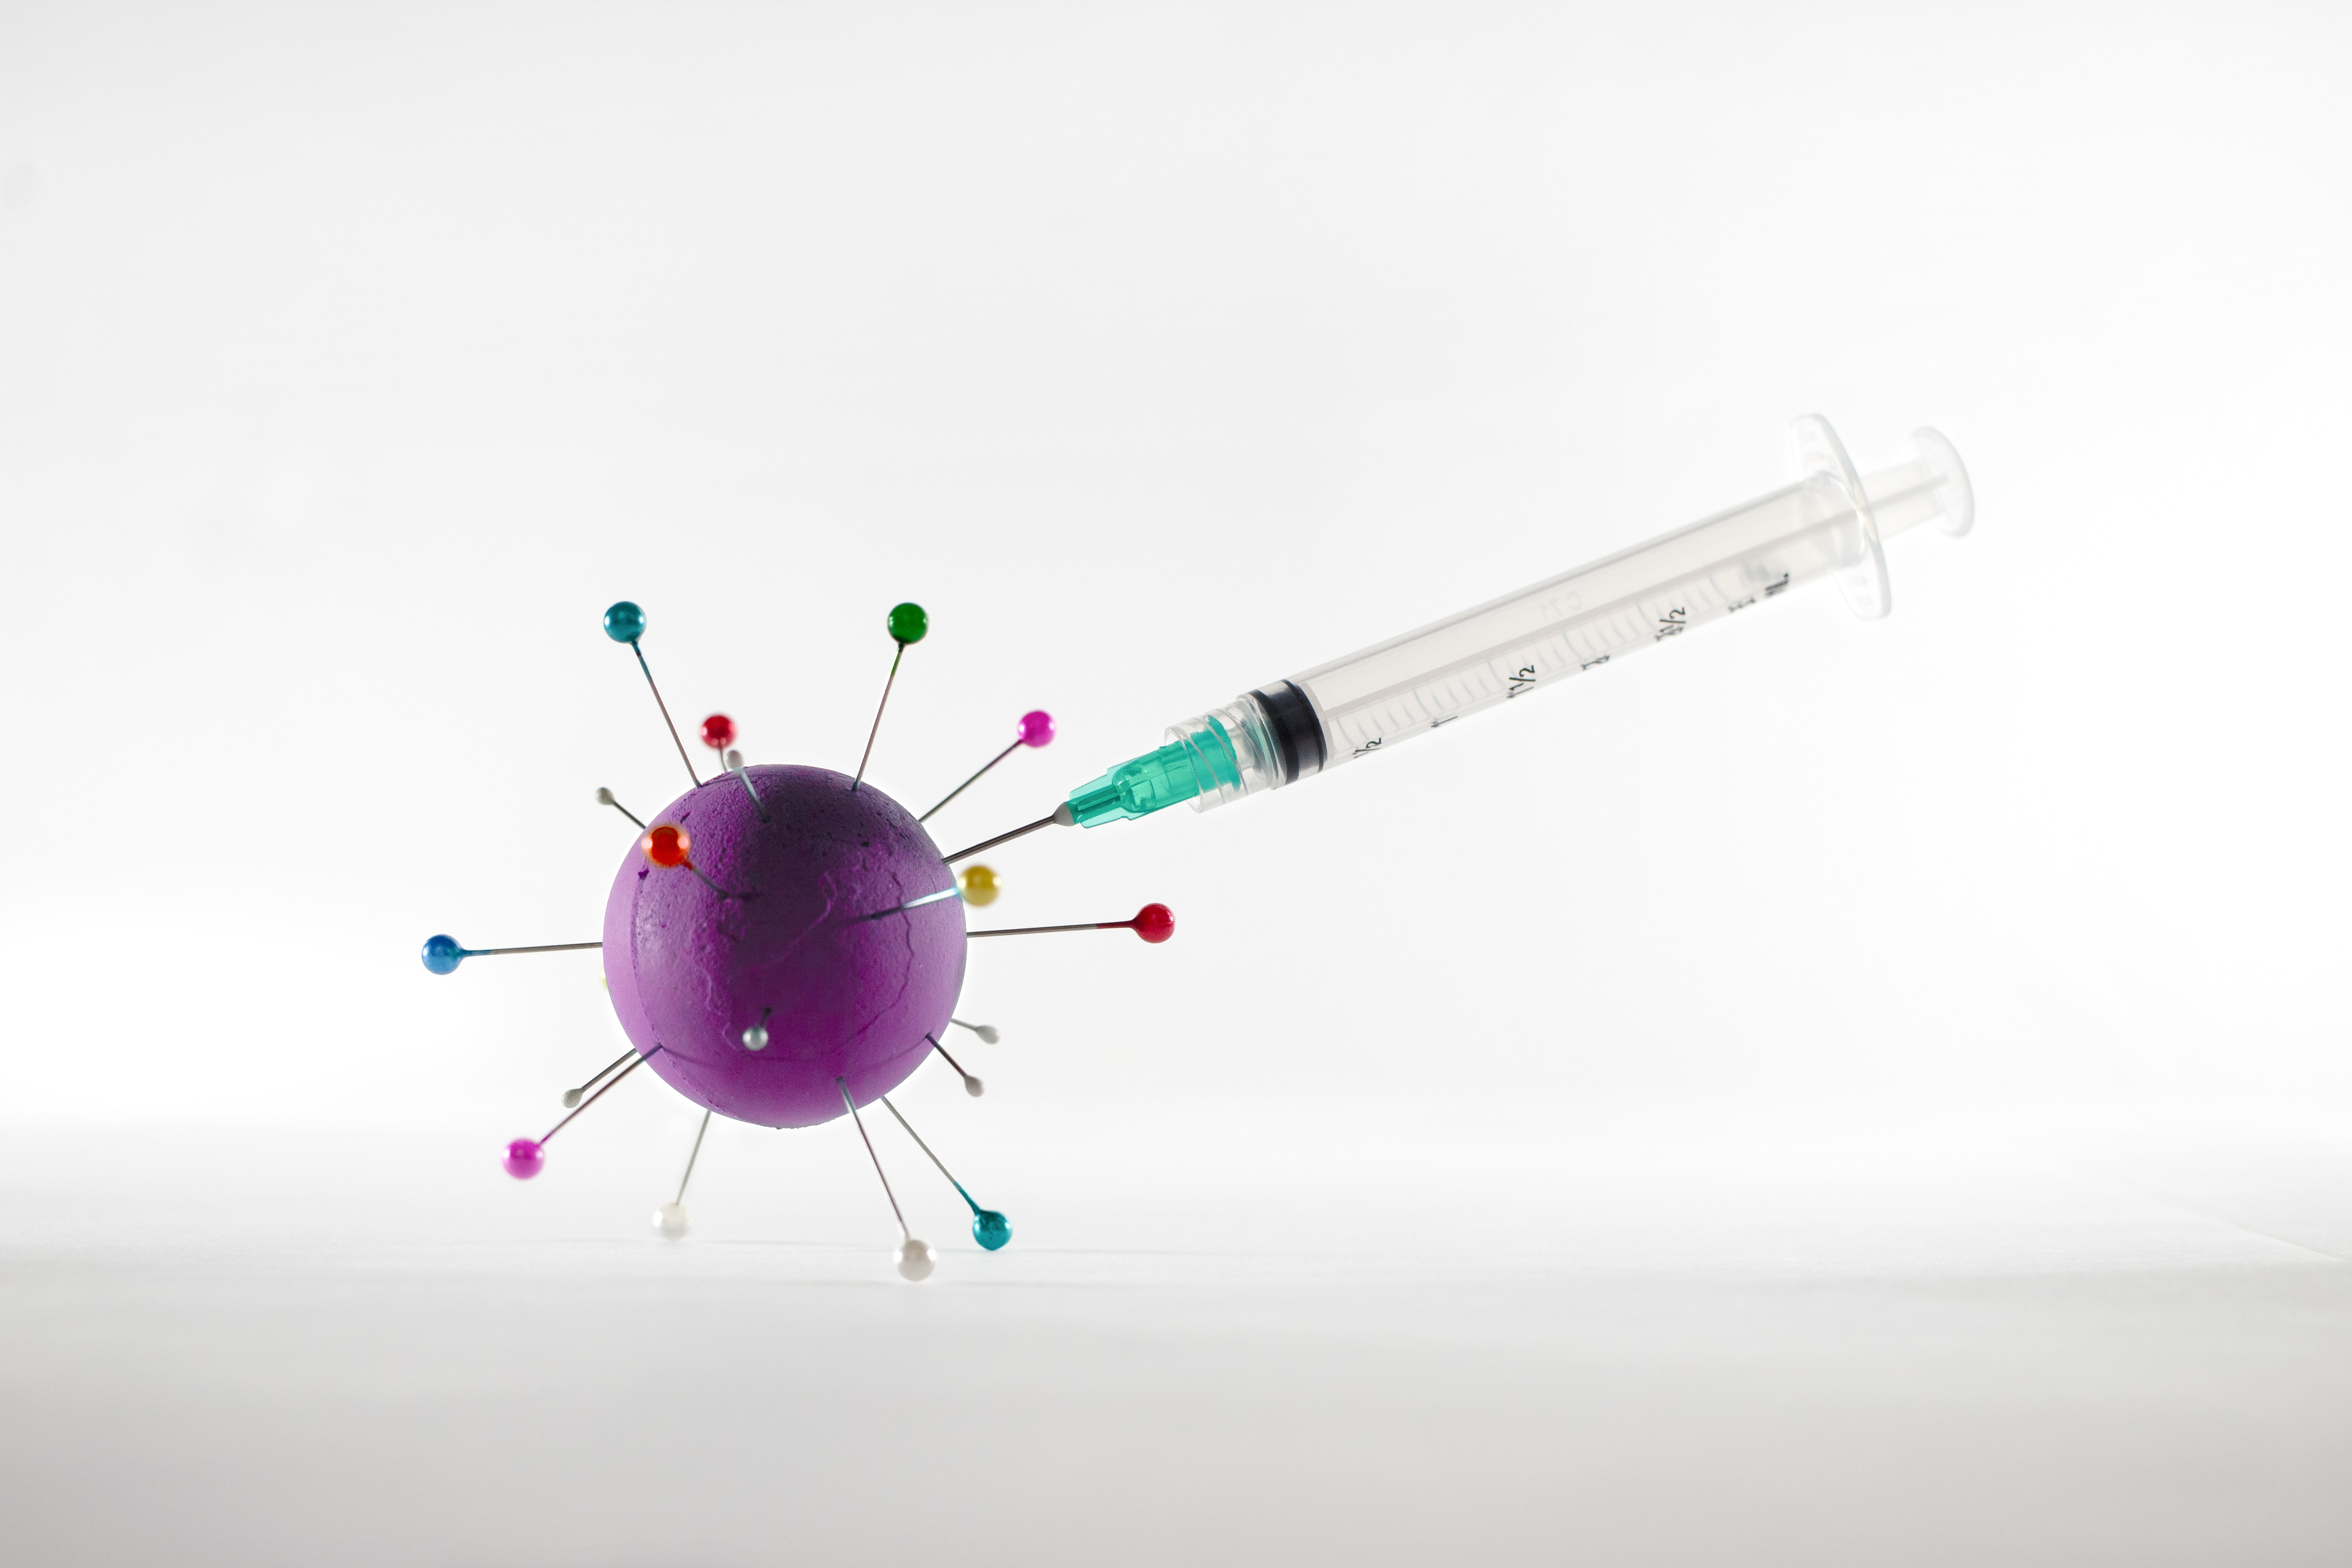 Vaccine demonstration with syringe and virus models.